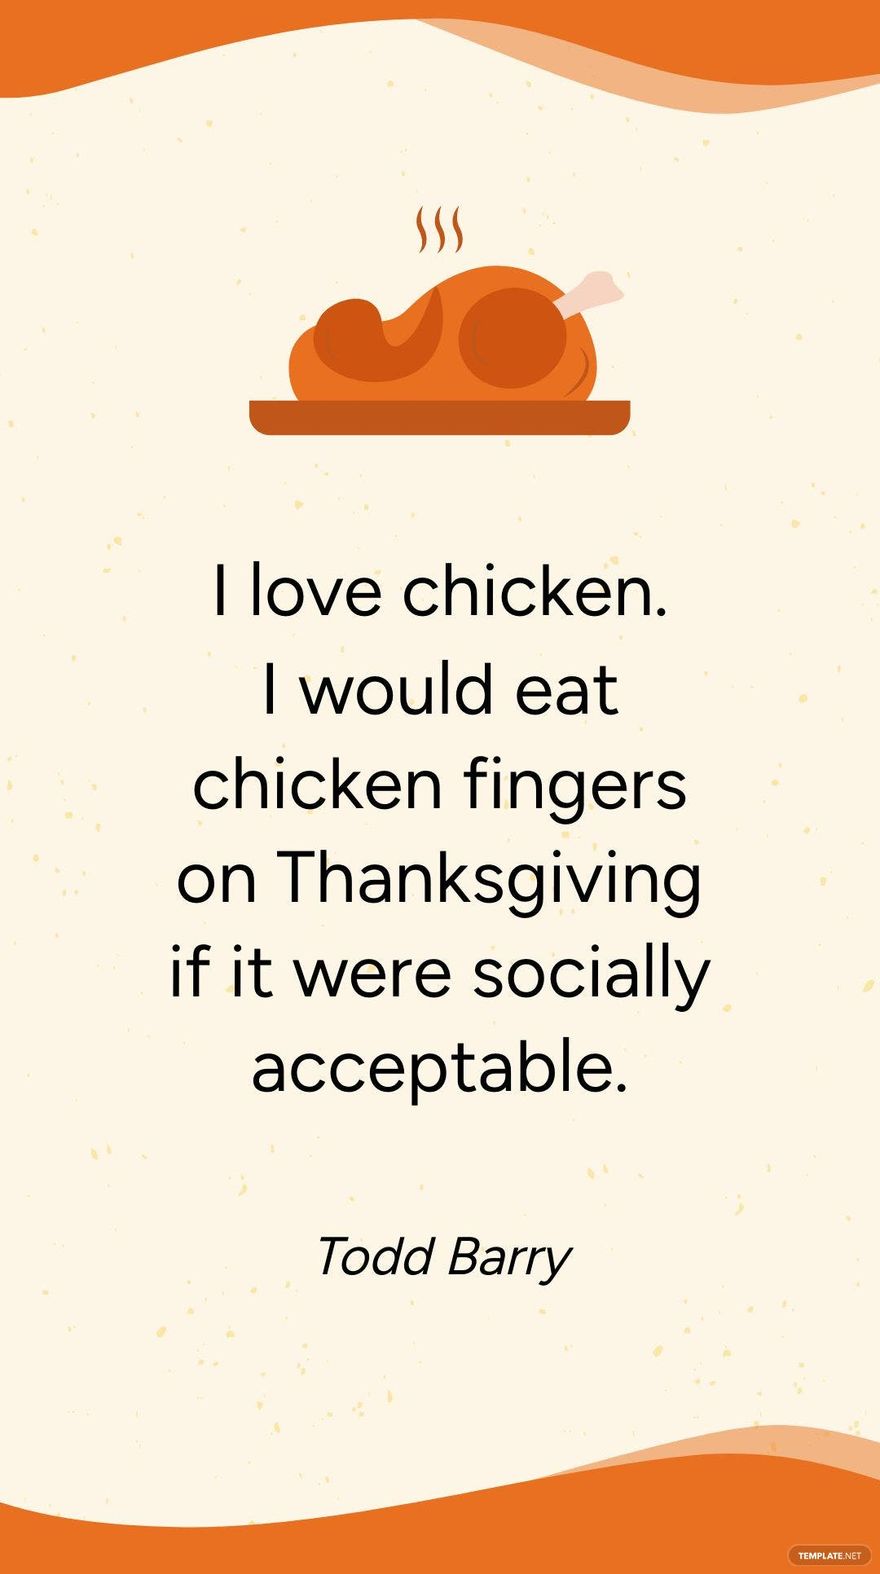 Todd Barry - I love chicken. I would eat chicken fingers on Thanksgiving if it were socially acceptable. in JPG